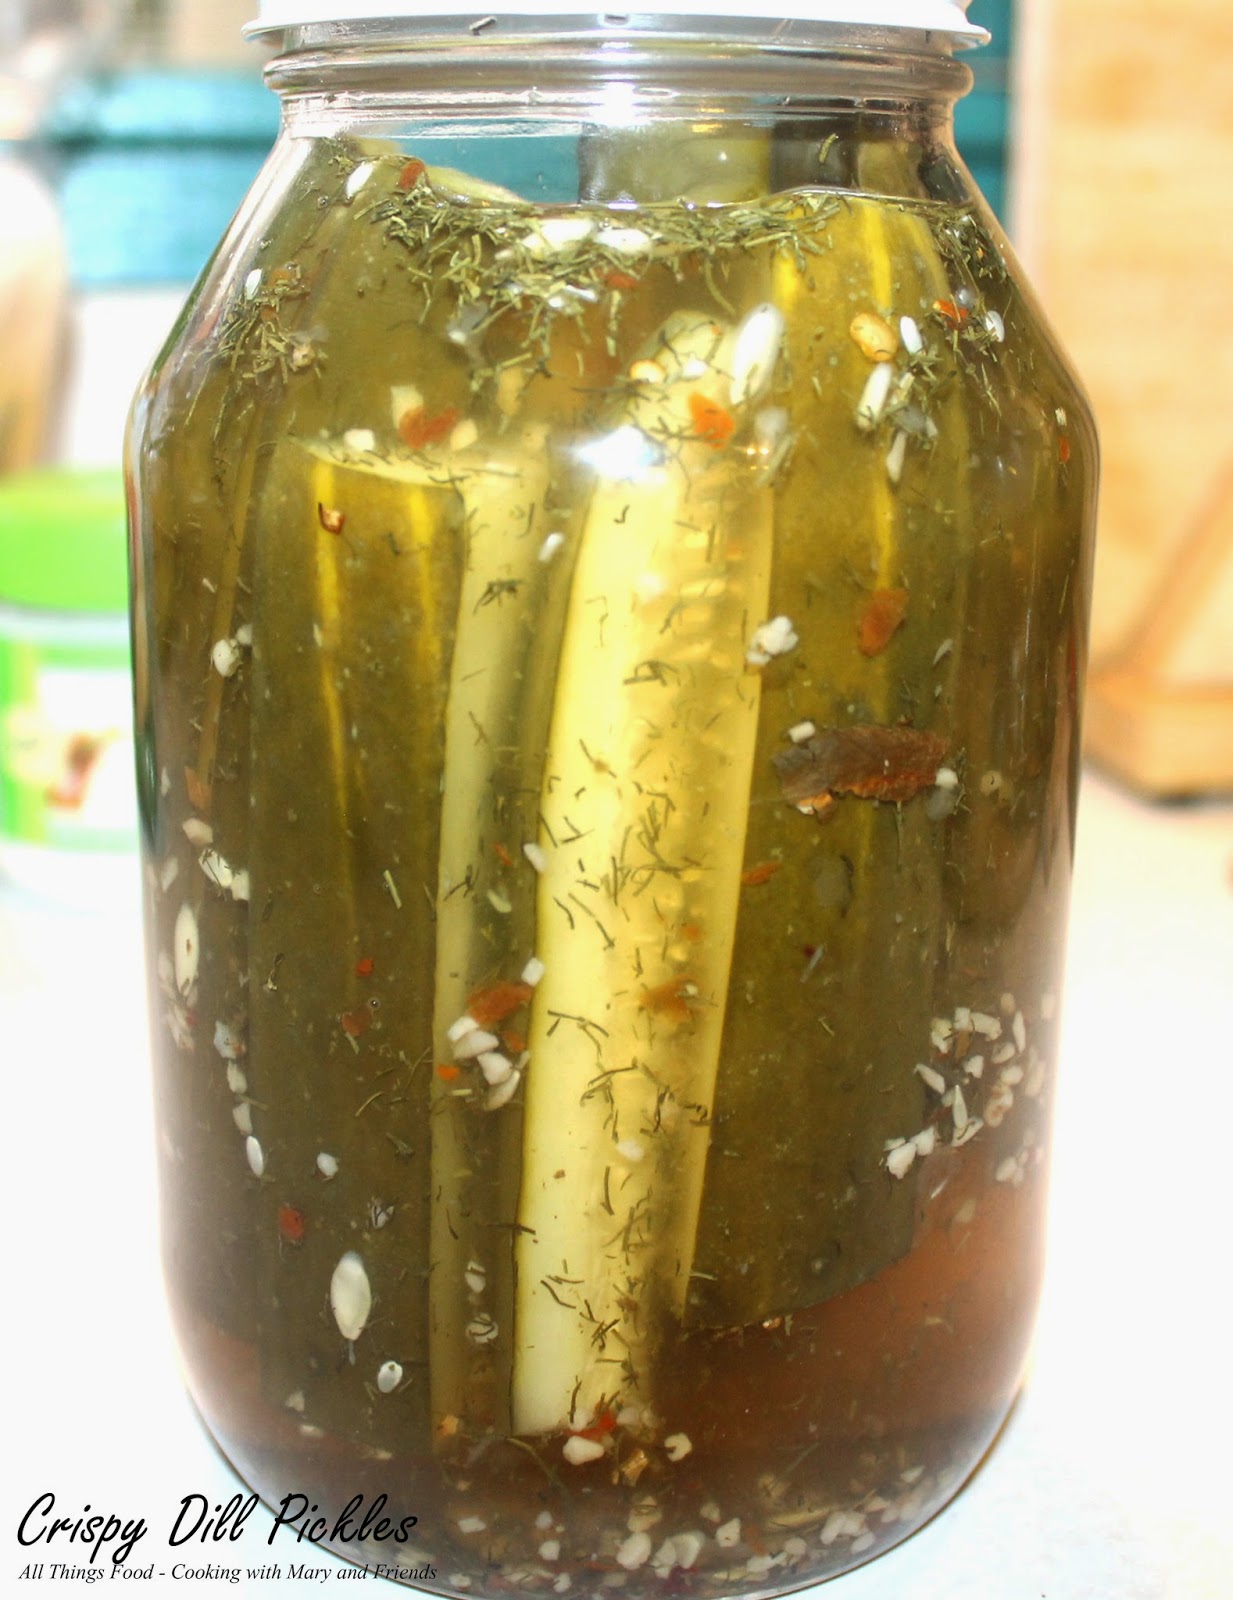 Cooking With Mary and Friends: Crispy Dill Pickles